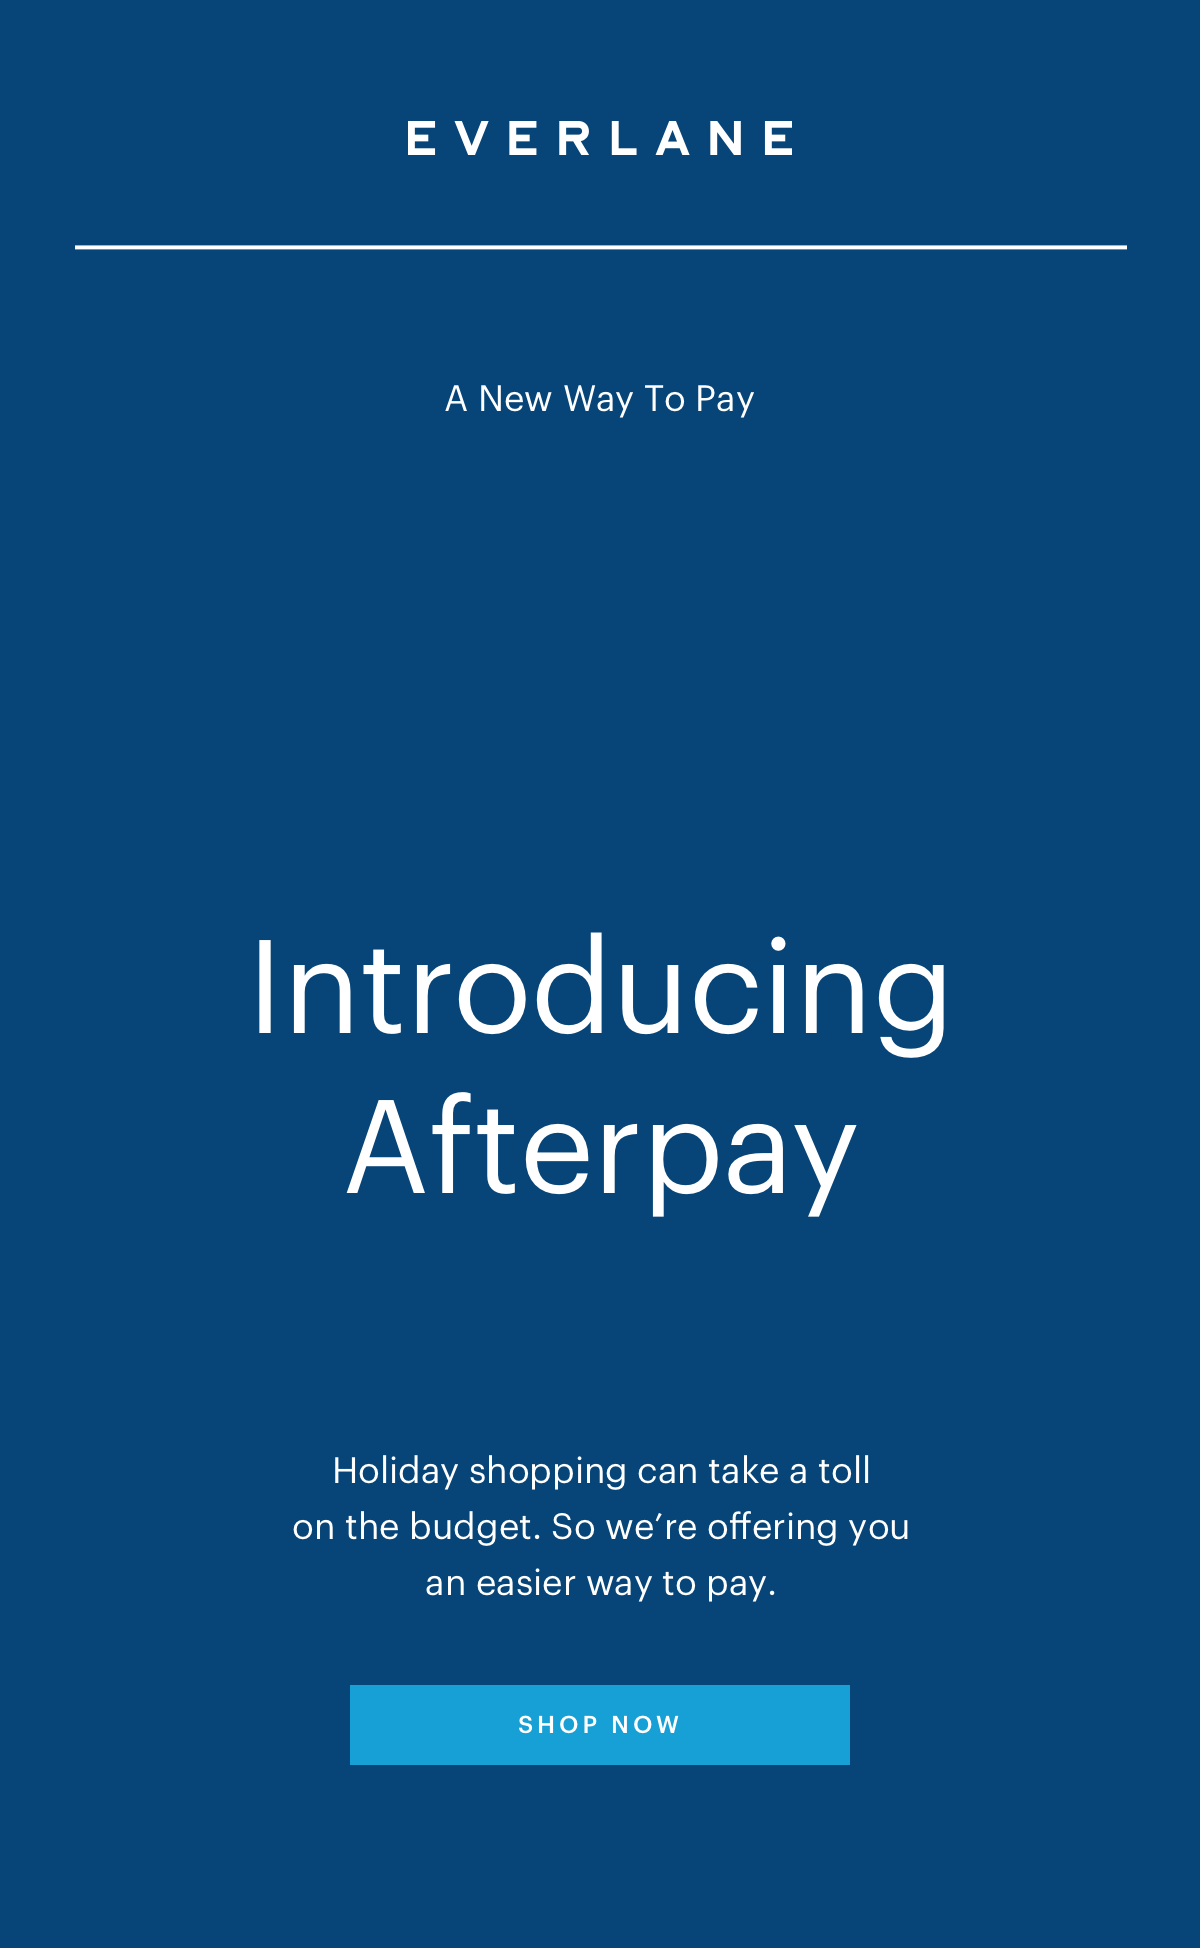 A New Way To Pay. Introducing Afterpay. Holiday shopping can take a toll on the budget. So we're offering you an easier way to pay.